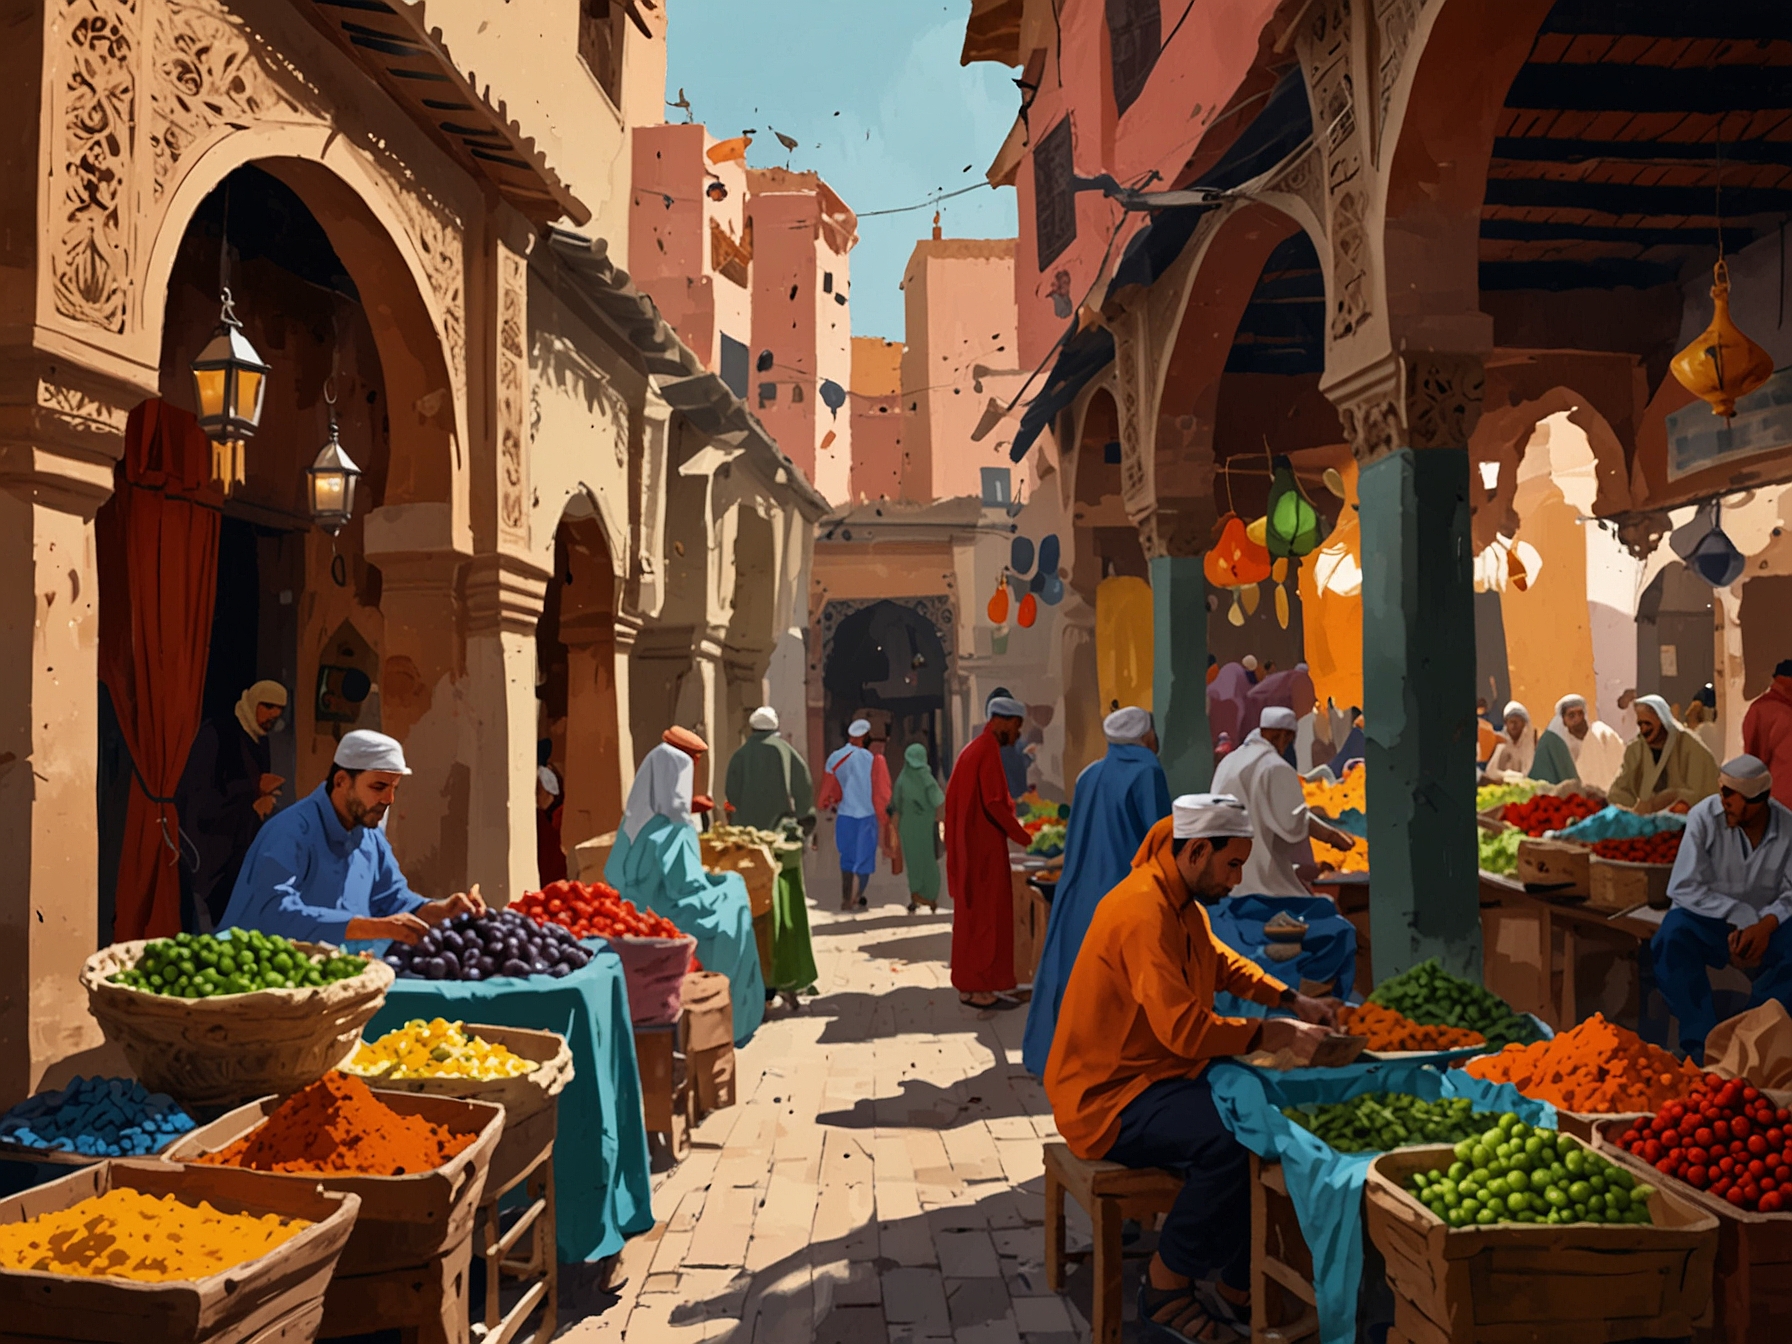 A bustling Moroccan market in Marrakech, filled with colorful souks, spices, and local vendors, showcasing the traditional and lively atmosphere of the ancient medina.